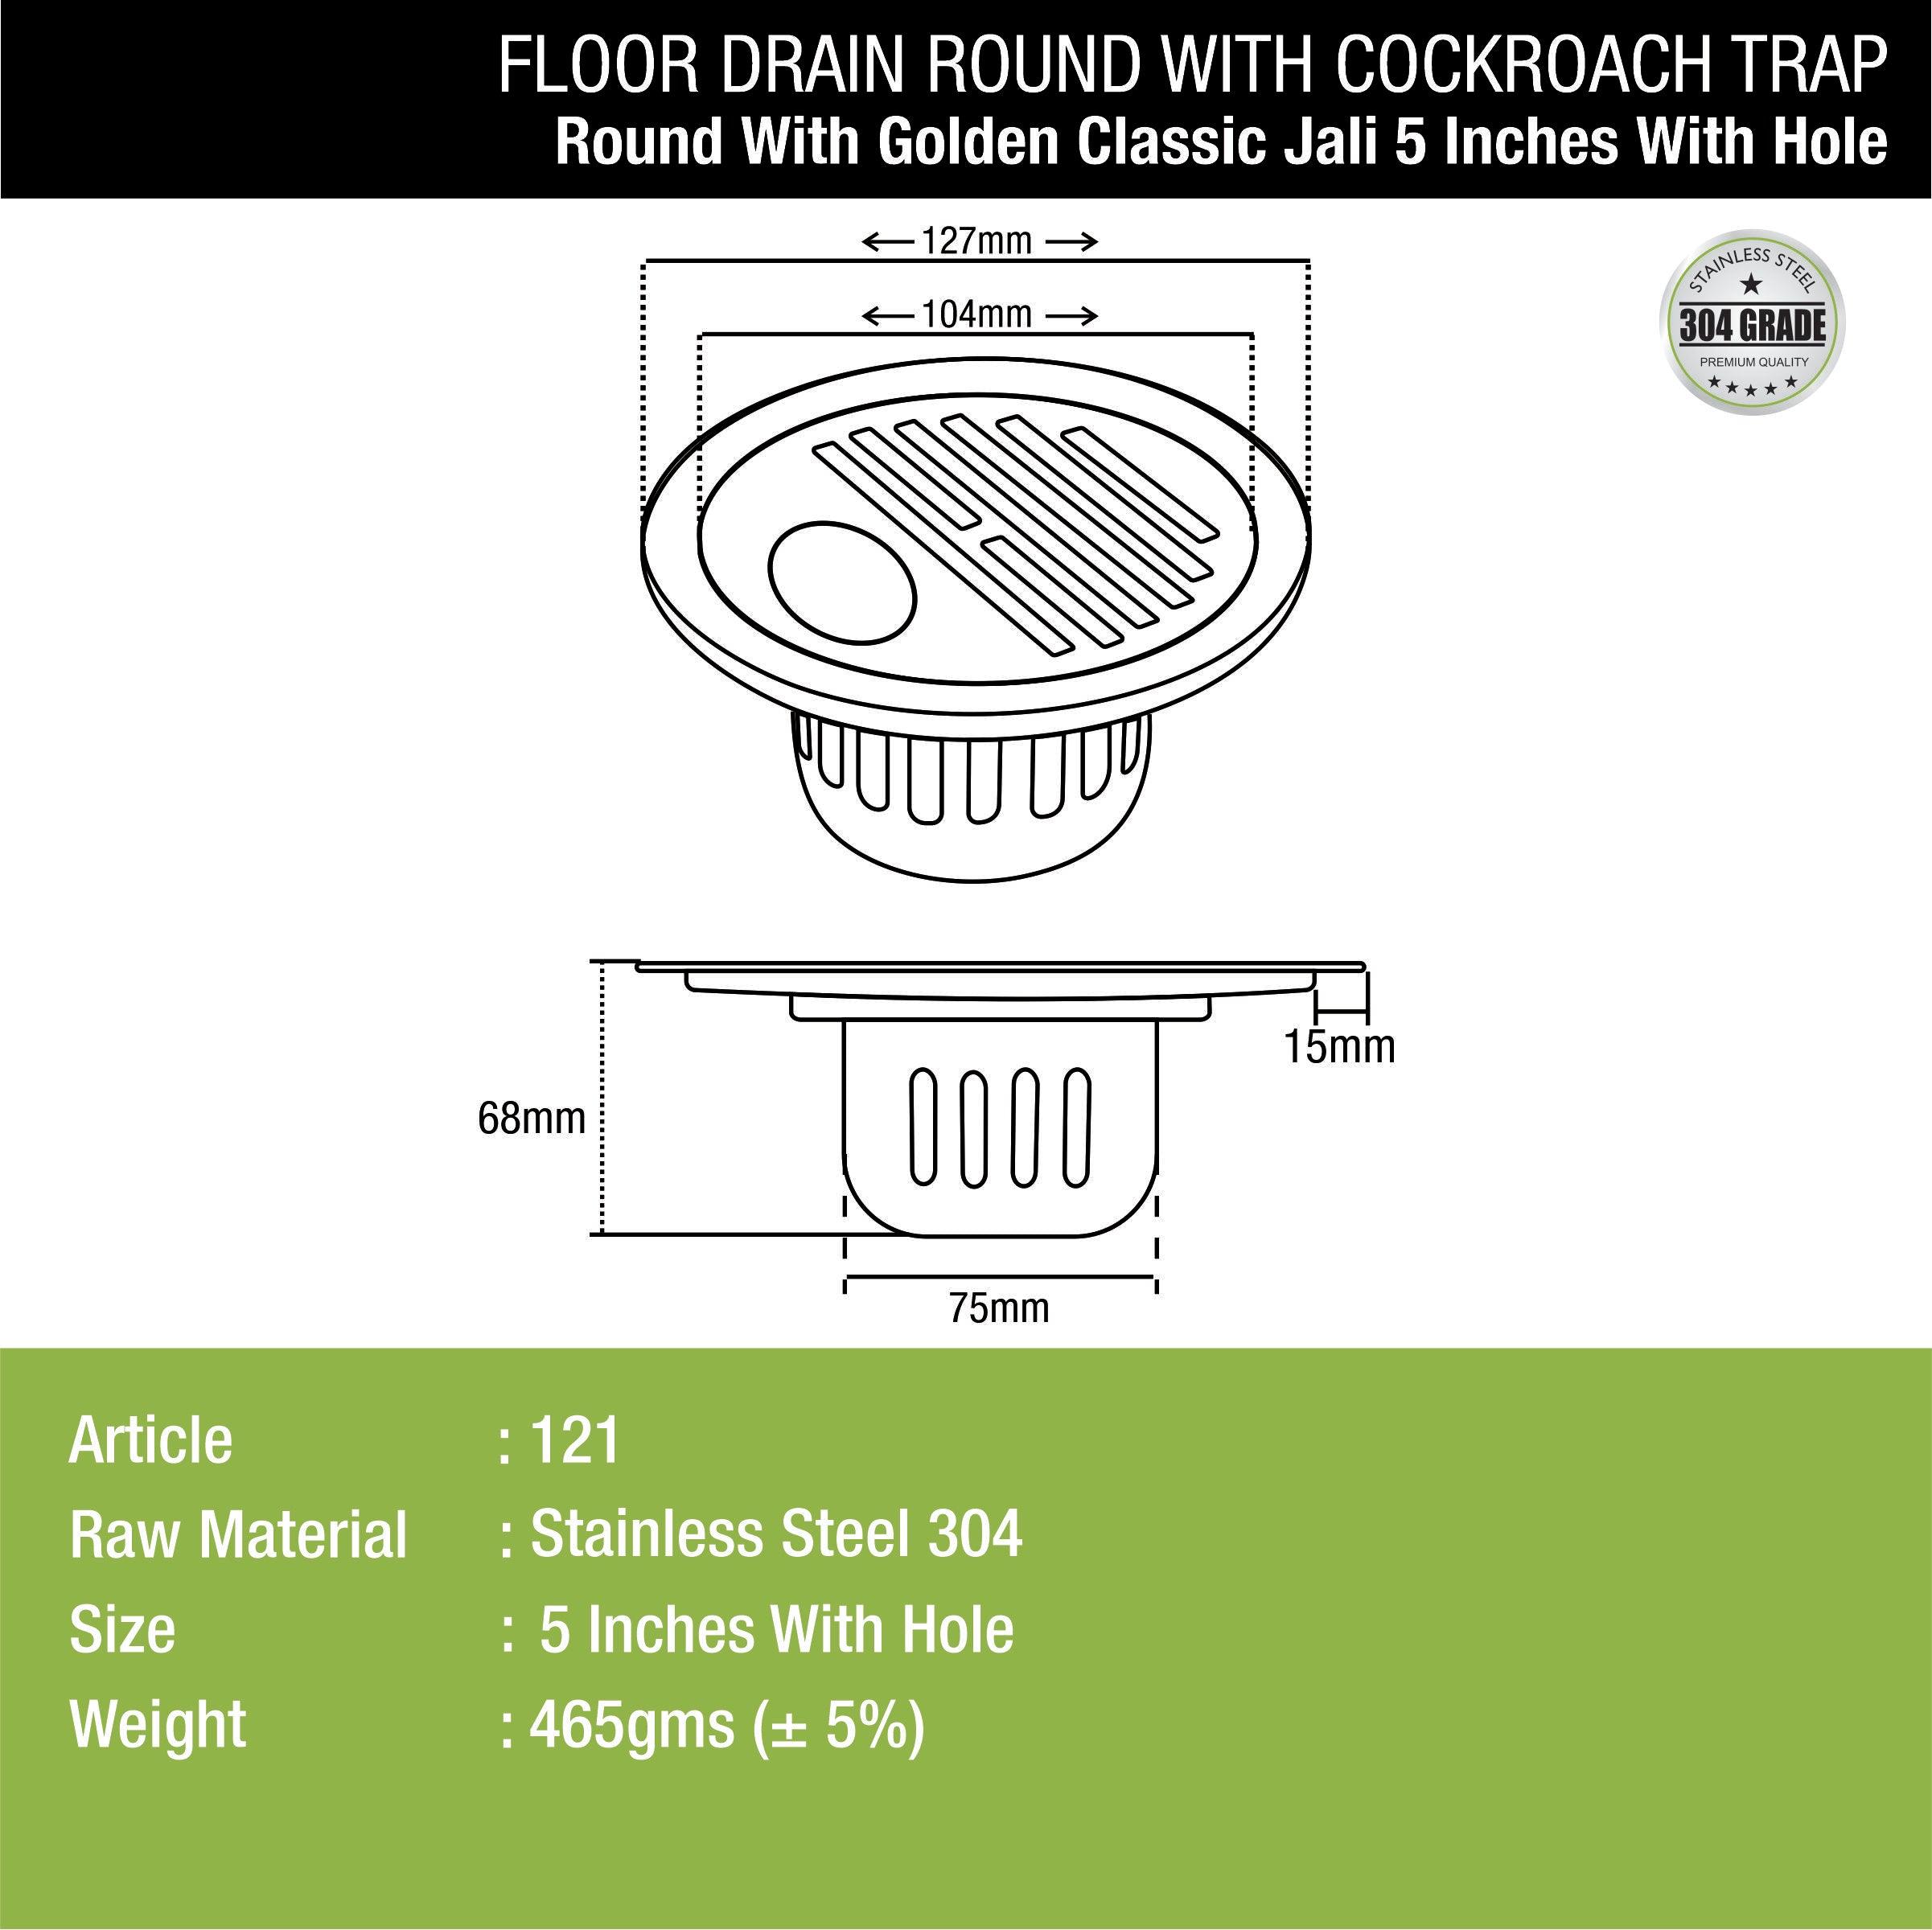 Golden Classic Jali Round Floor Drain (5 Inches) with Cockroach Trap and Hole dimensions and sizes